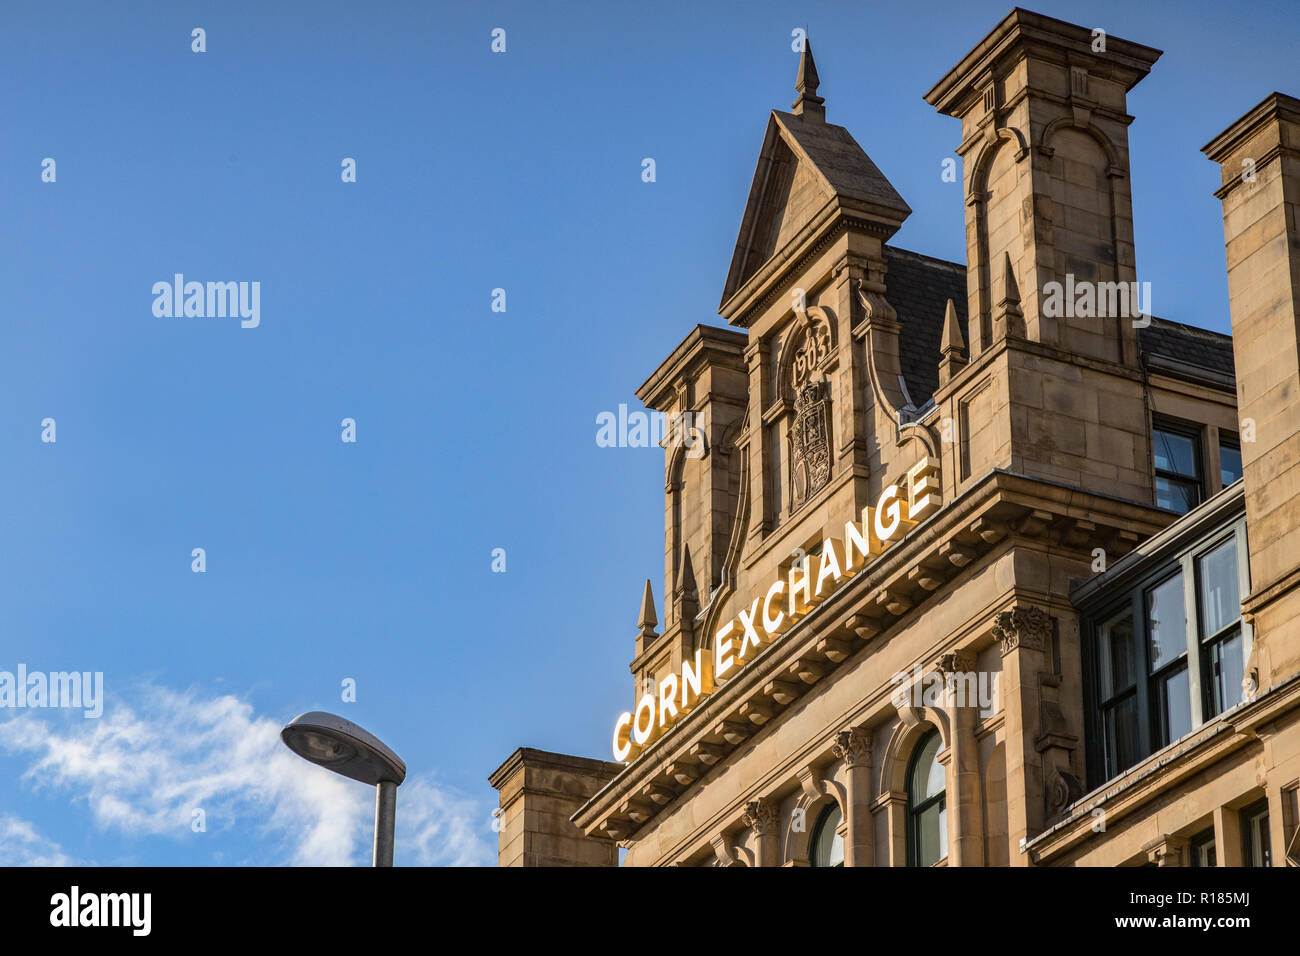 Corn Exchange building, in Exchange Square, Manchester, UK, on a sunny autumn day with clear blue sky. Stock Photo